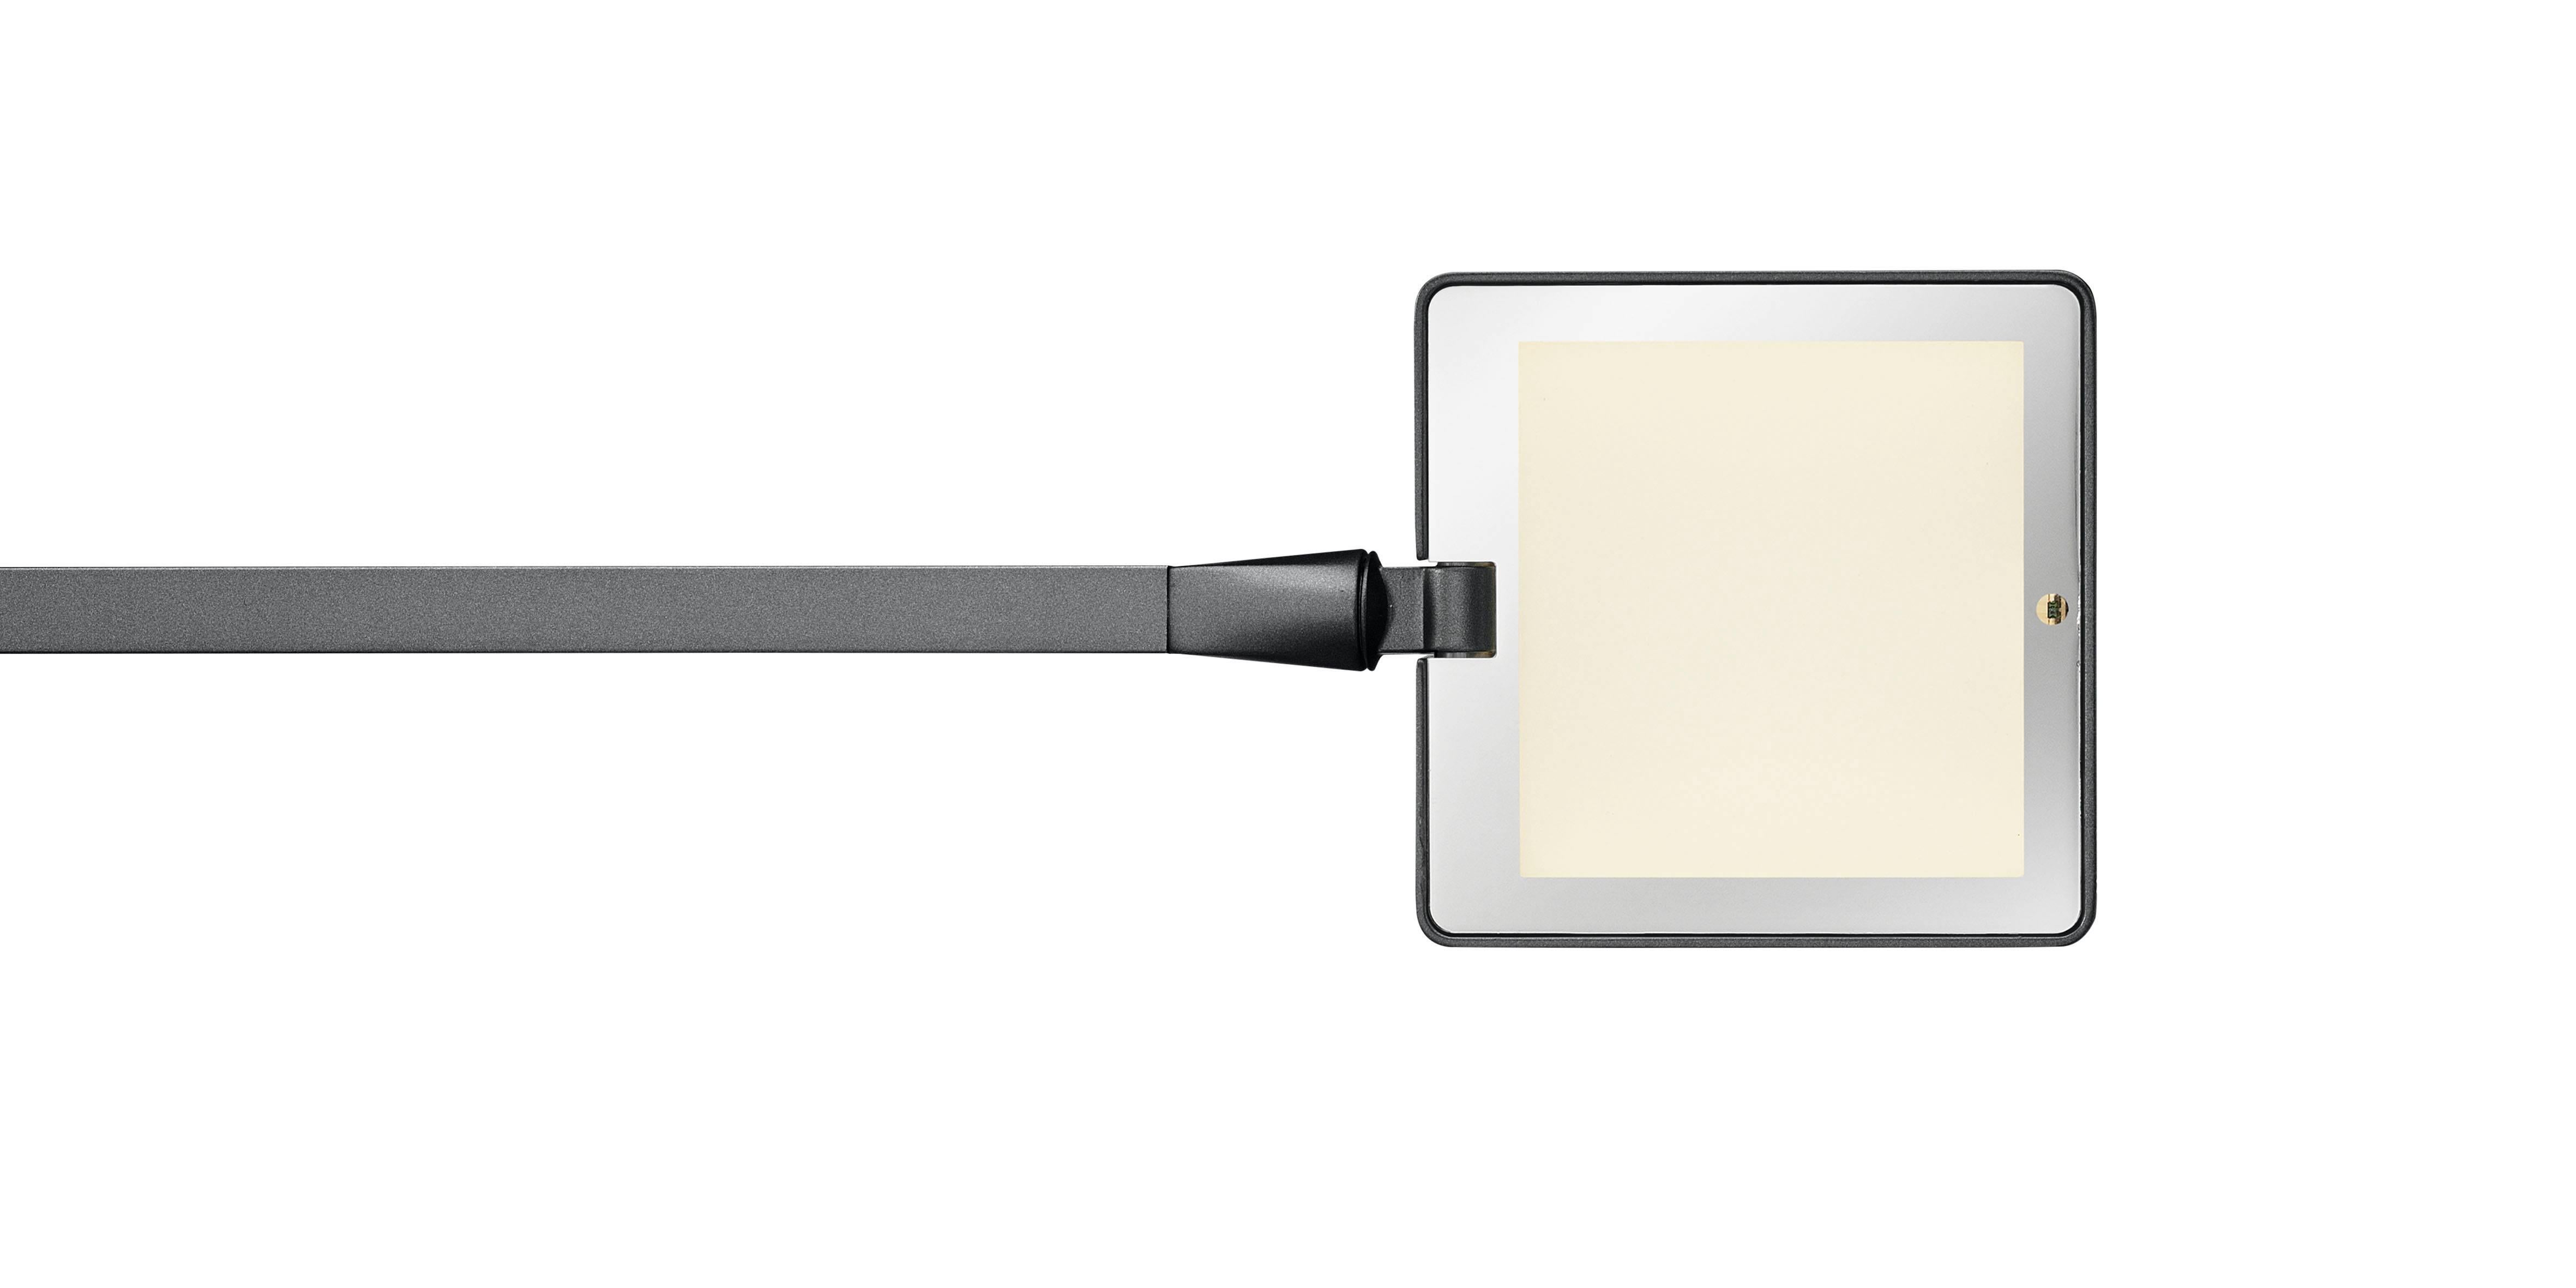 The newest addition to the popular Kelvin LED family, the Kelvin Edge offers the innovation and sleek design of the collection in a smaller package—without sacrificing output. Featuring the exclusive Edge Lighting Technology from which it takes its